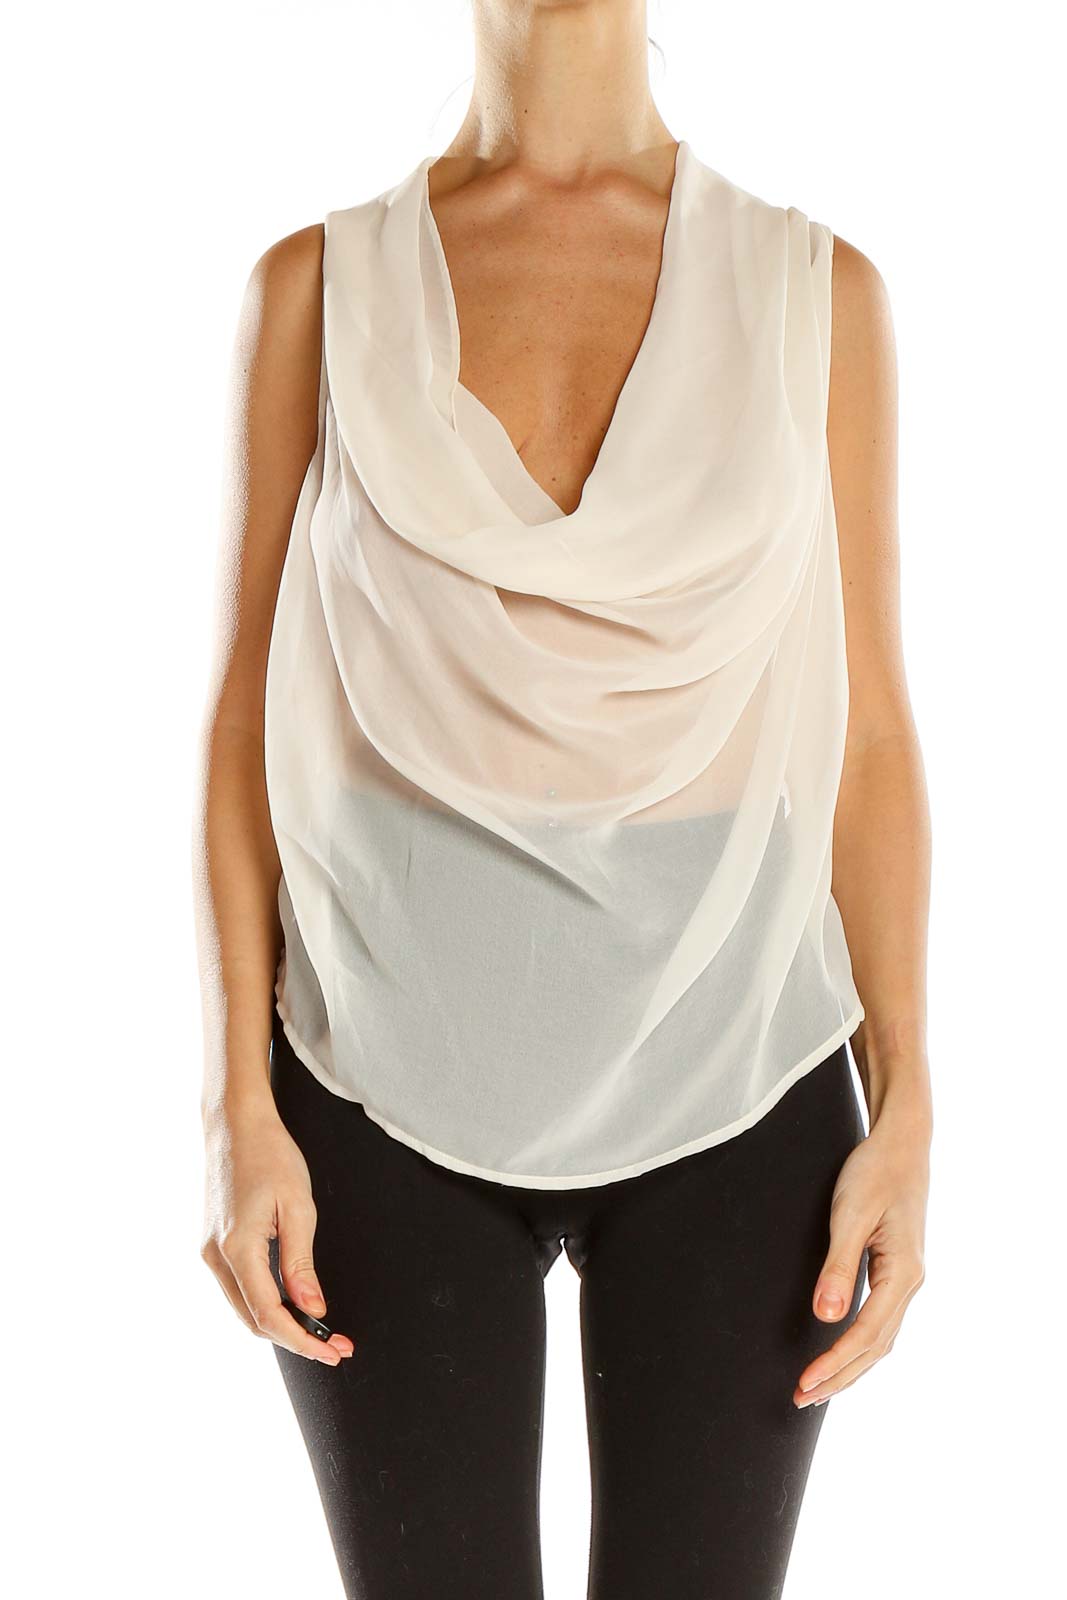 White Sheer Cowl Neck Chic Blouse Front